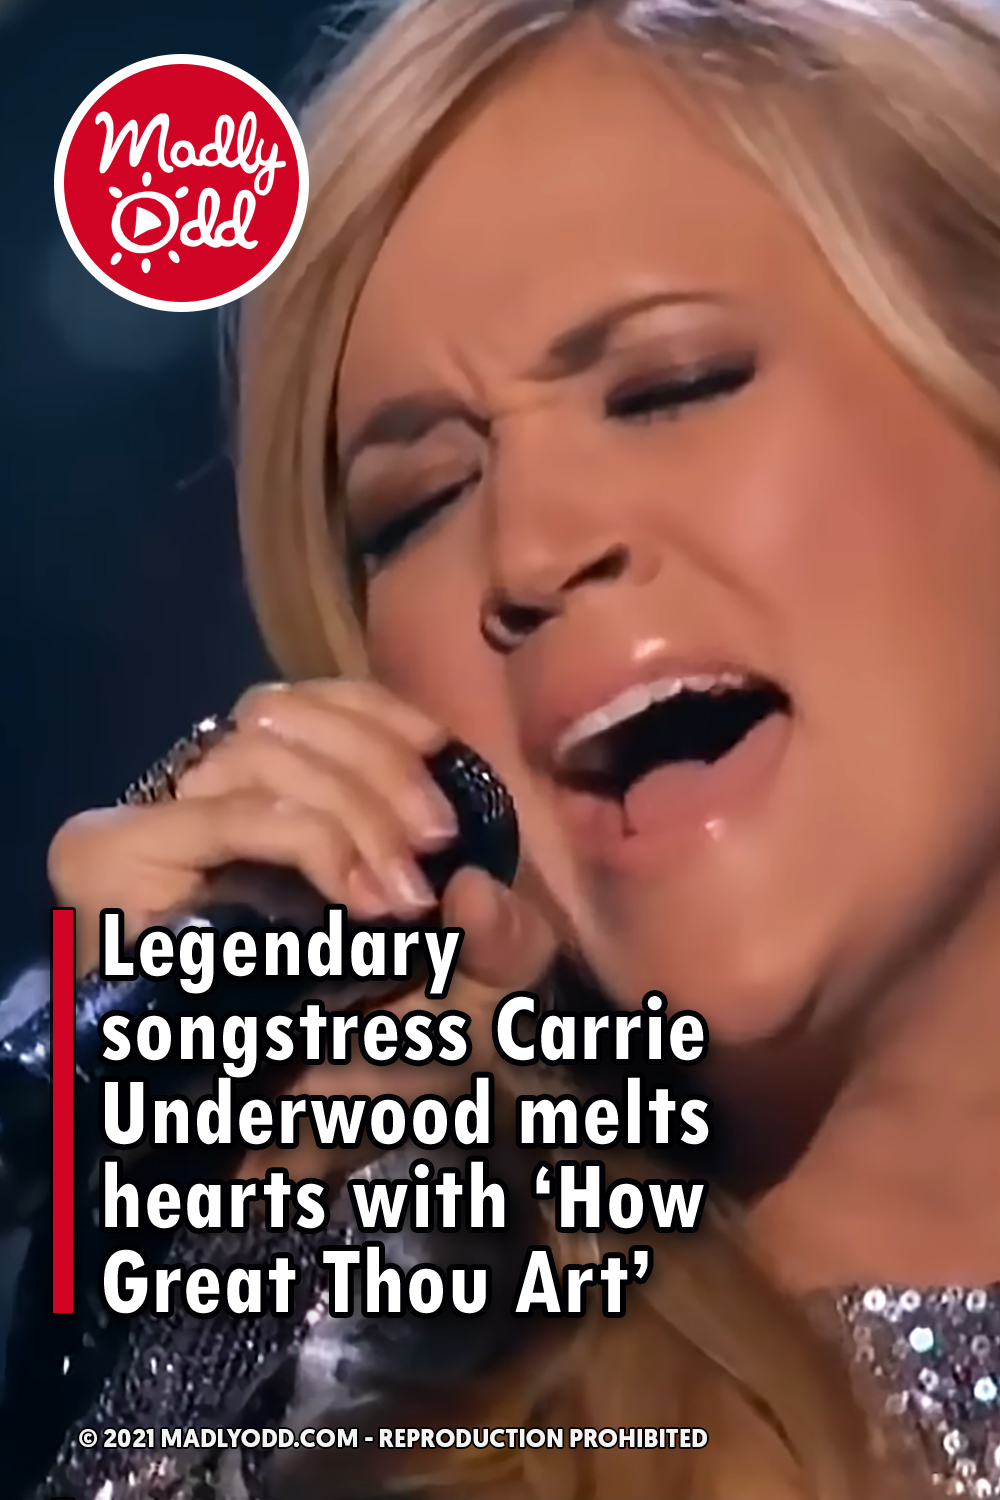 Legendary songstress Carrie Underwood melts hearts with ‘How Great Thou Art’